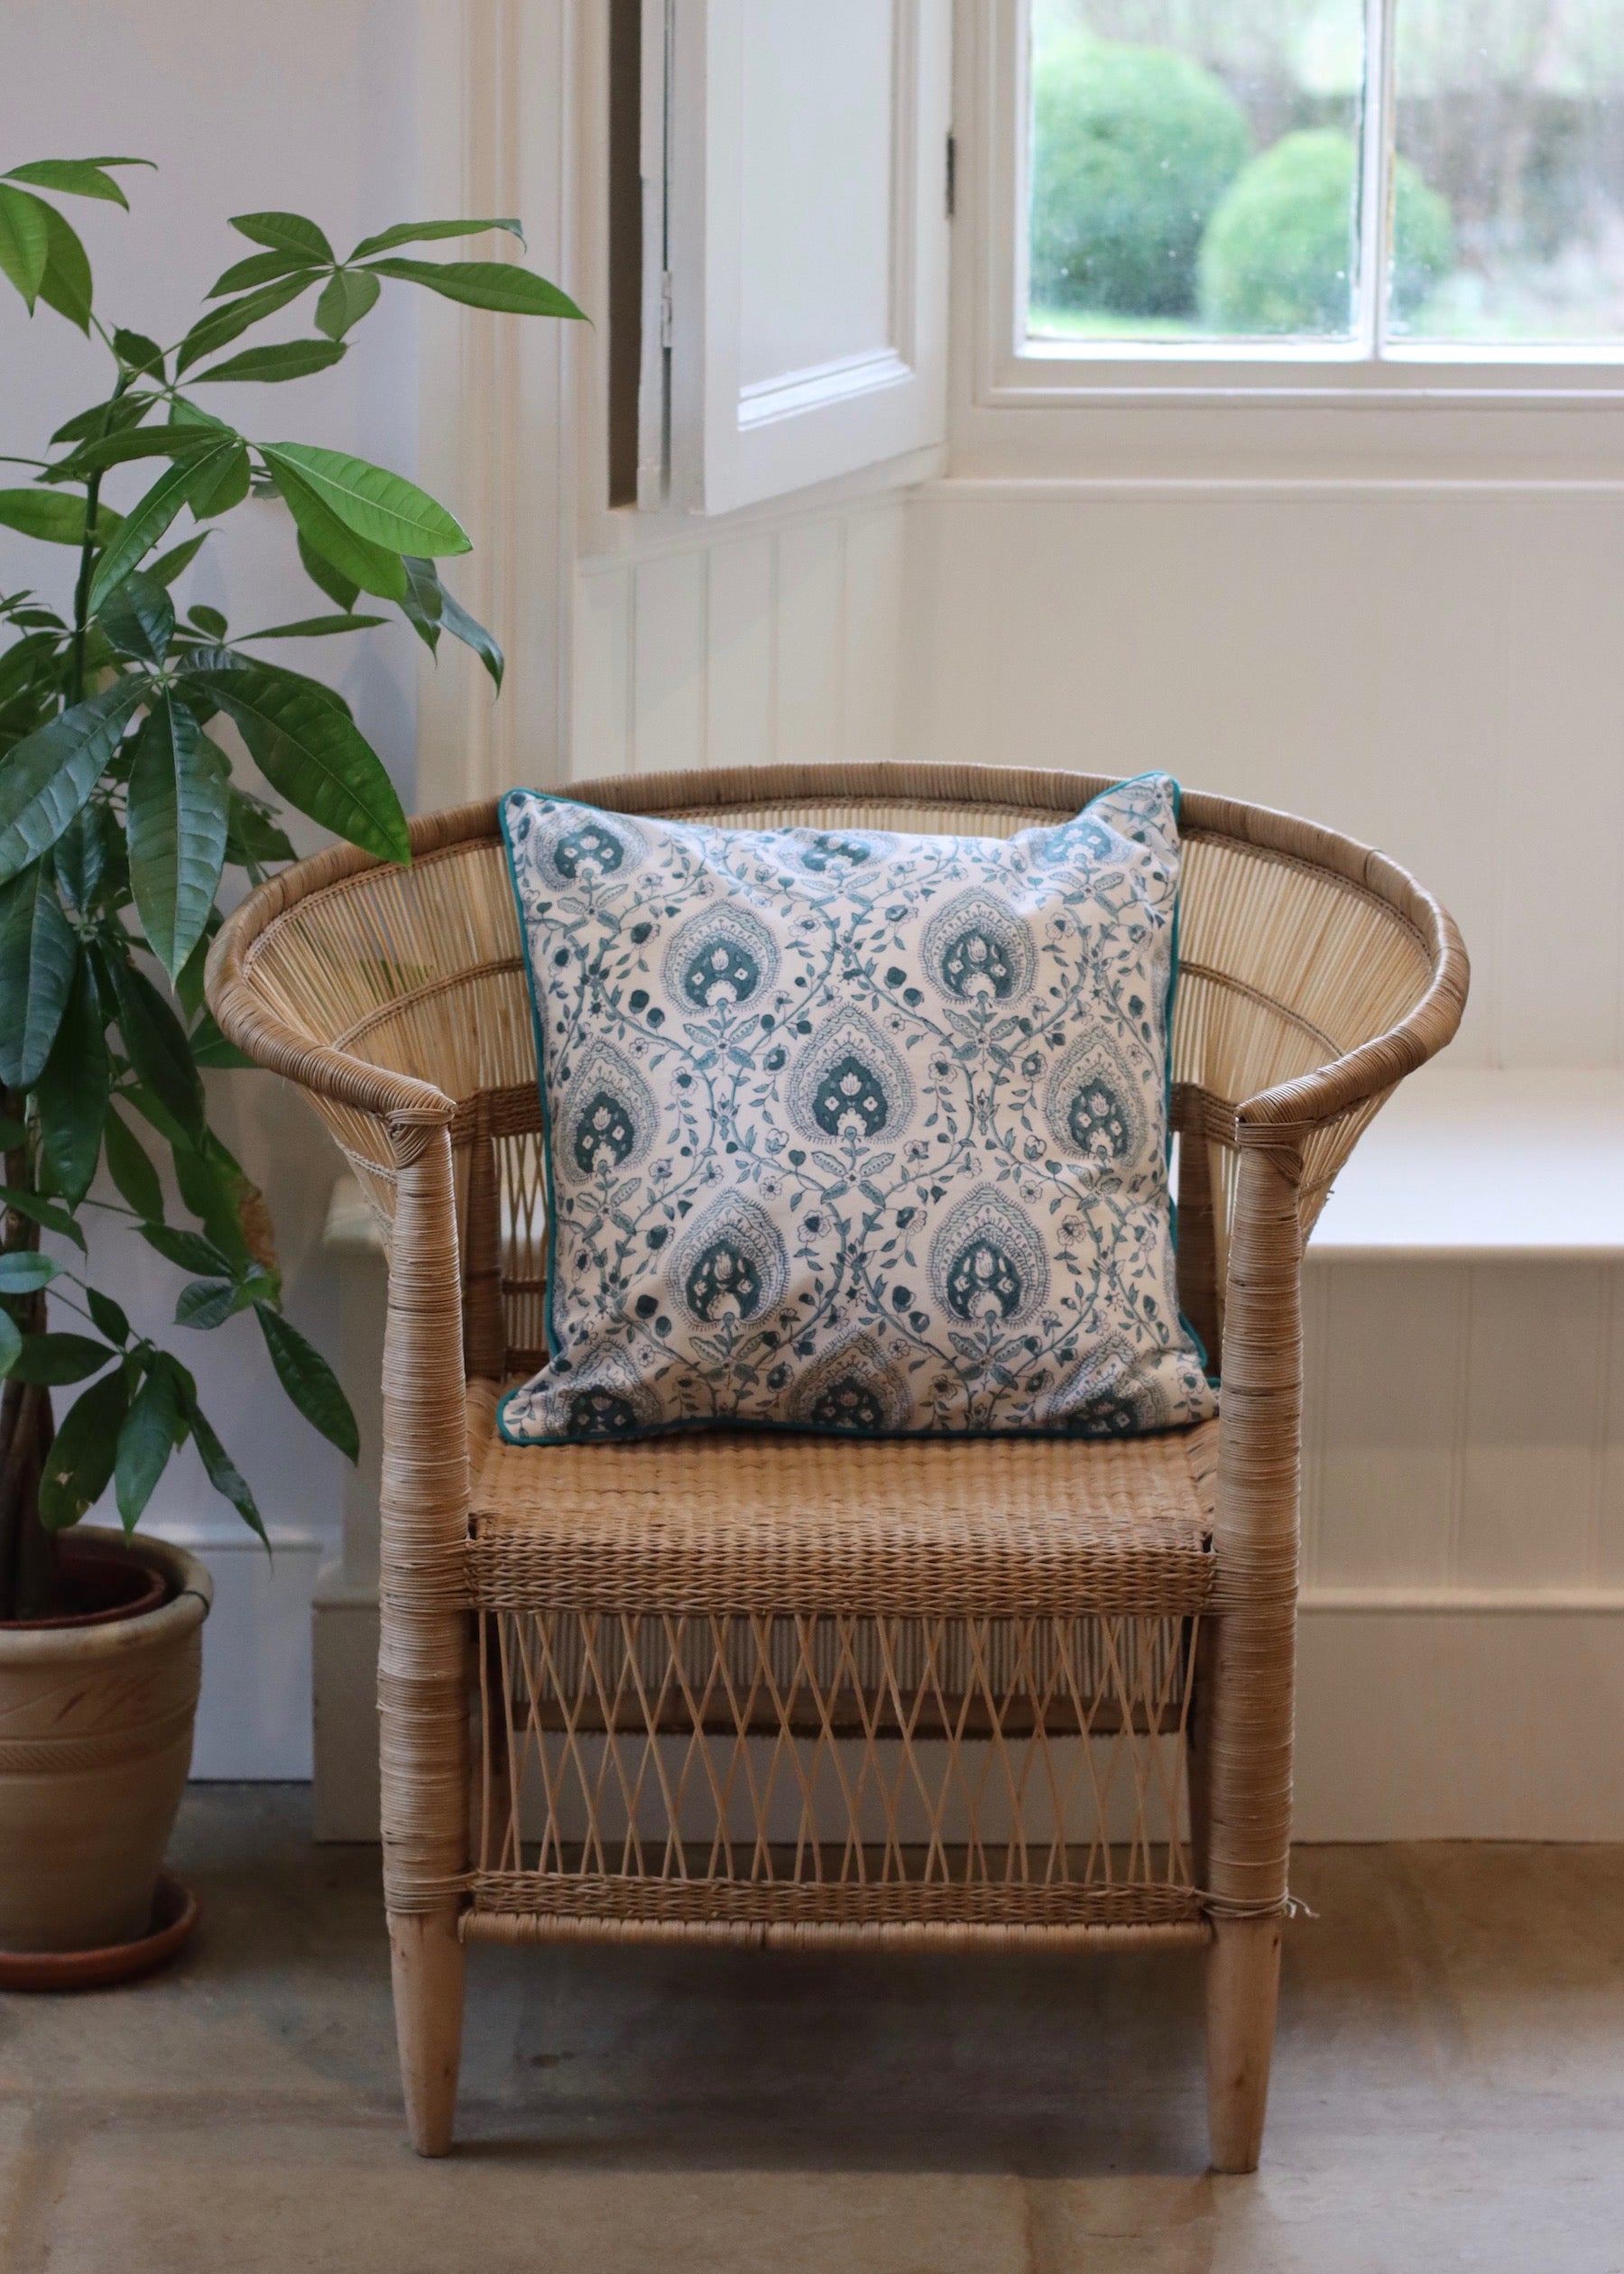 Block Print Cushion Cover - White and Teal